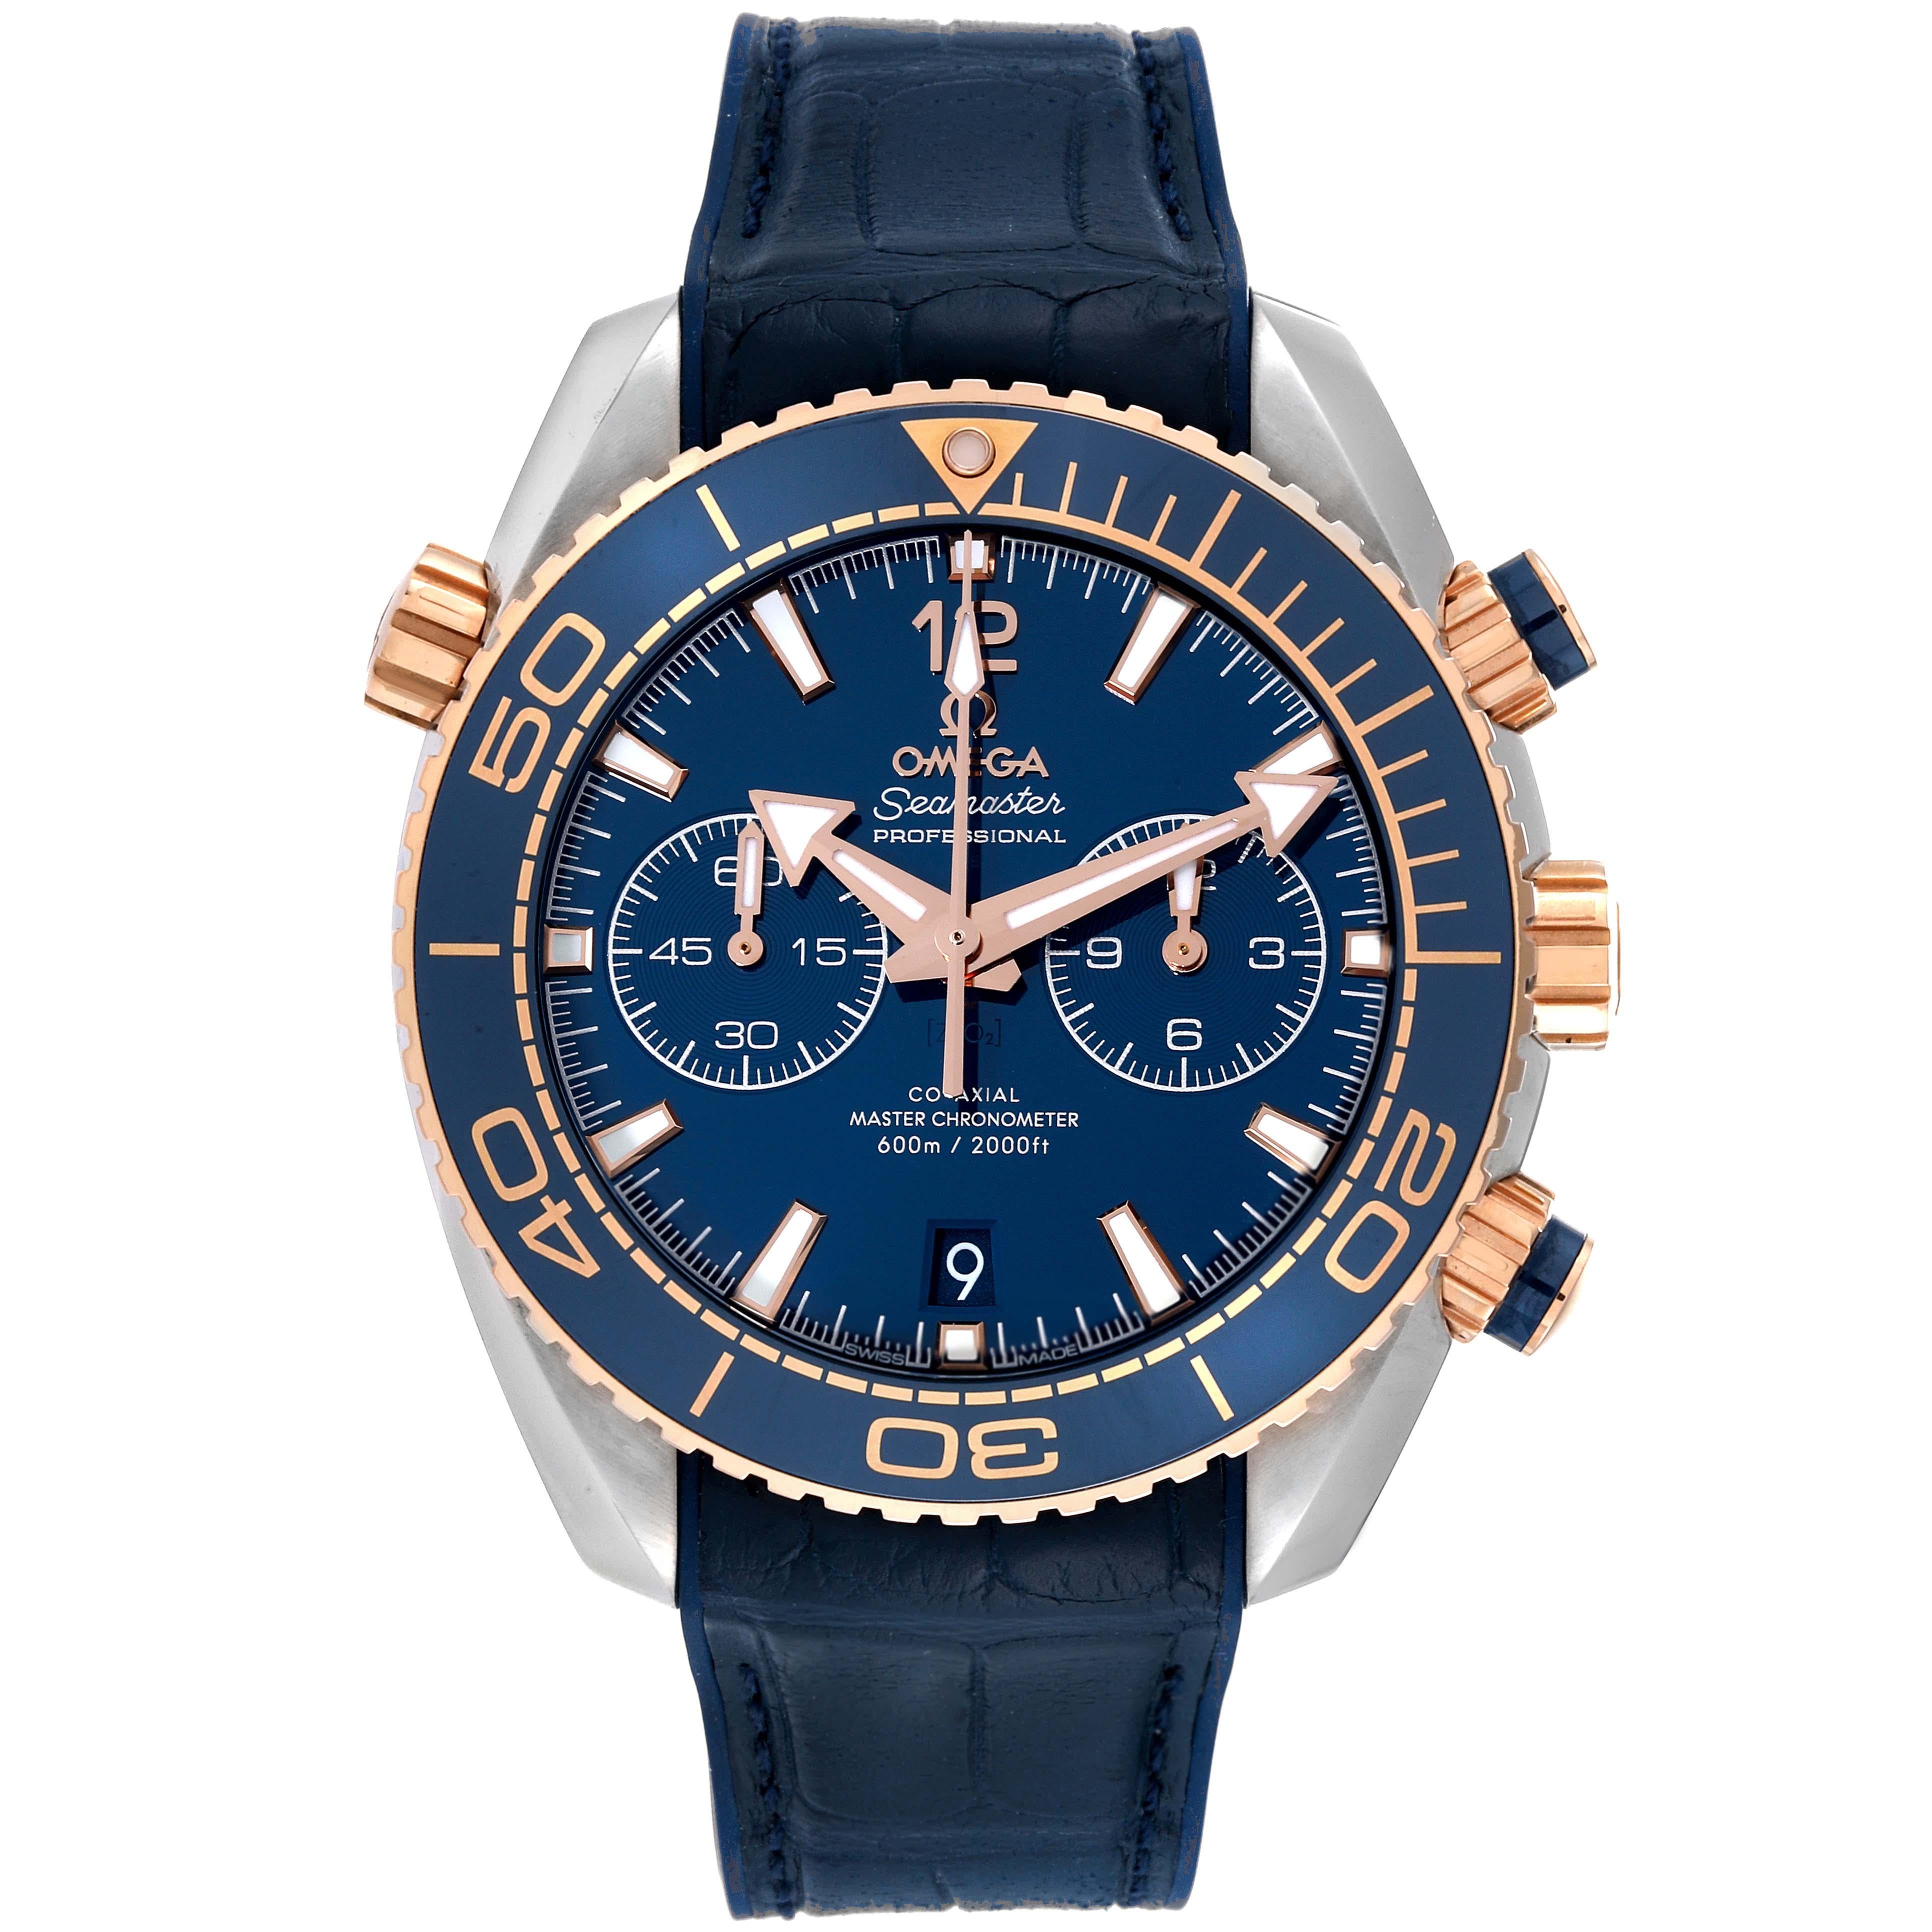 Omega Seamaster Planet Ocean 600m Co-Axial Steel Mens Watch 215.23.46.51.03.001 Box Card. Automatic self-winding chronograph - chronometer movement. Stainless steel and rose gold round case 45.5 mm in diameter. Helium Escapement Valve at the 10